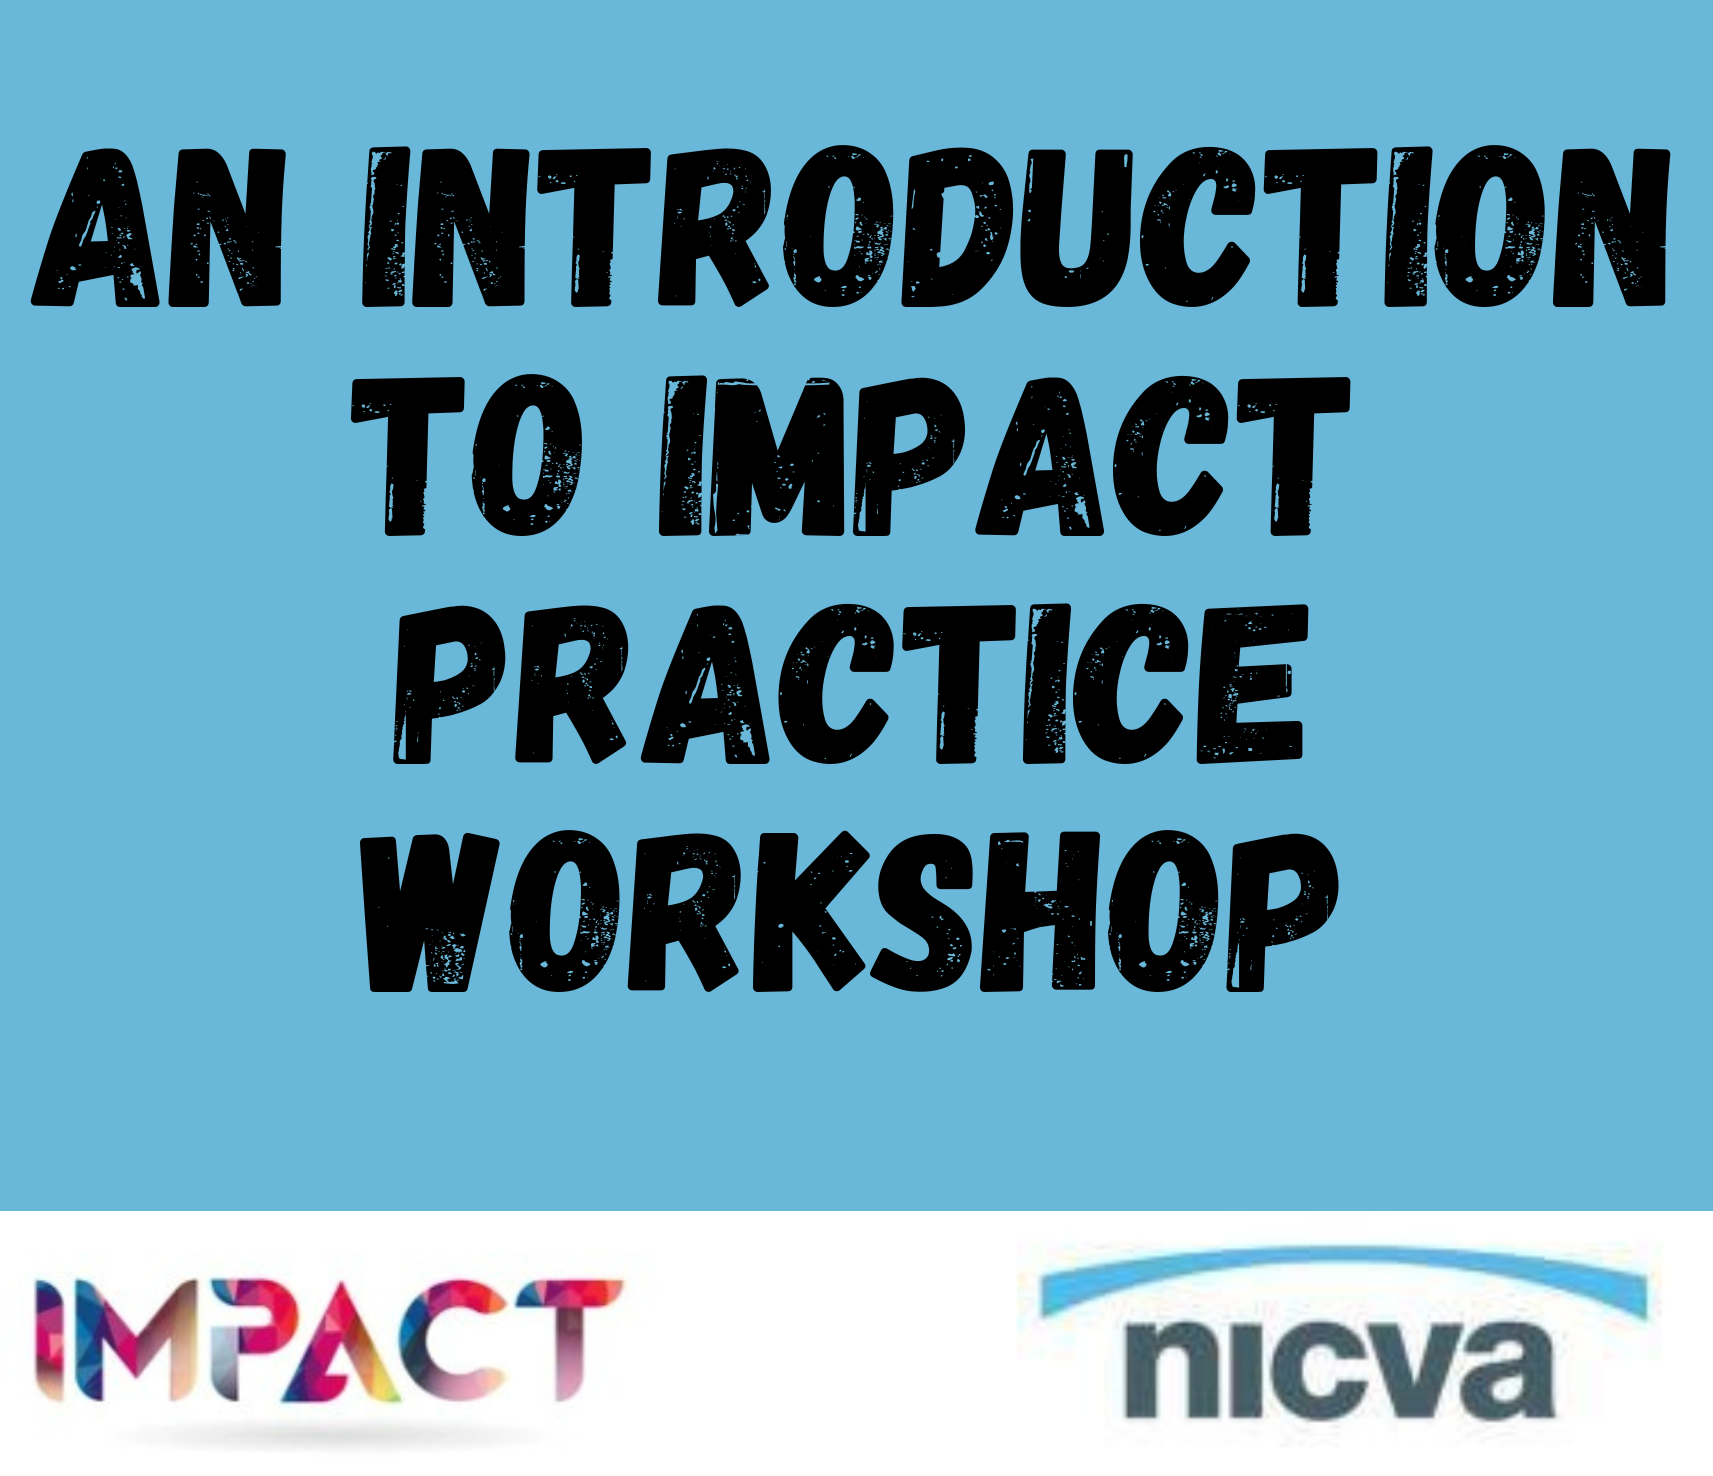 An introduction to impact practice workshop